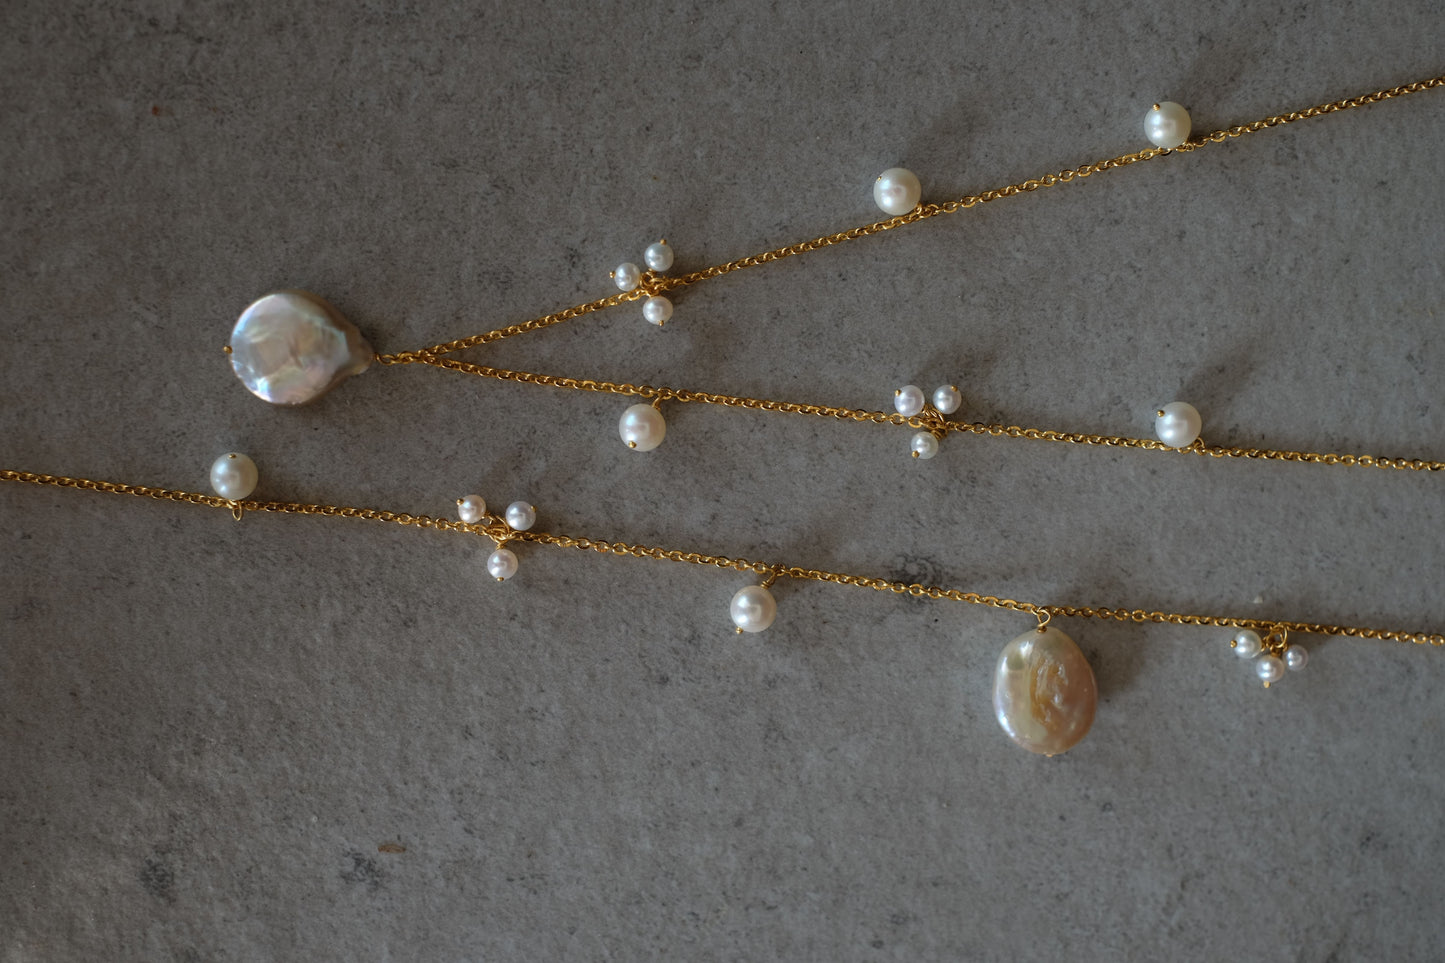 Mismatched Pearl Necklace